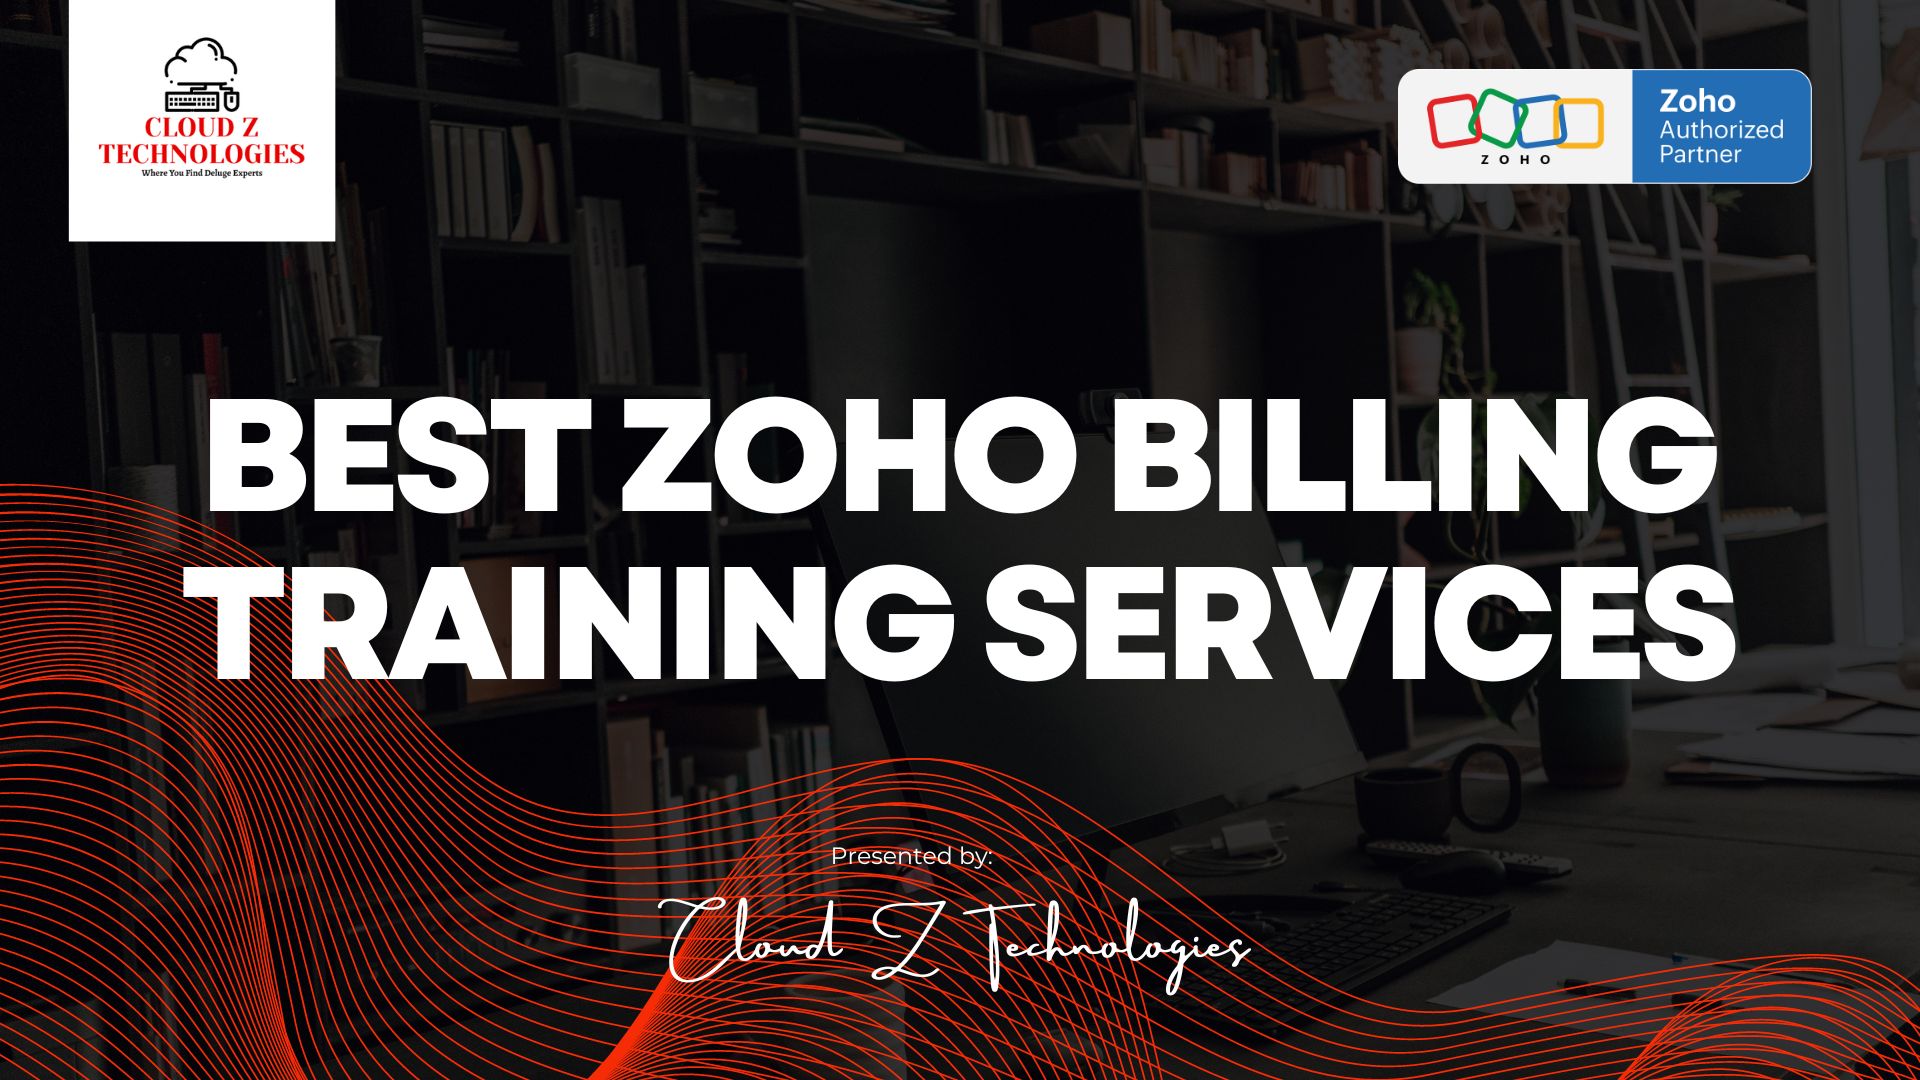 Zoho Billing training services